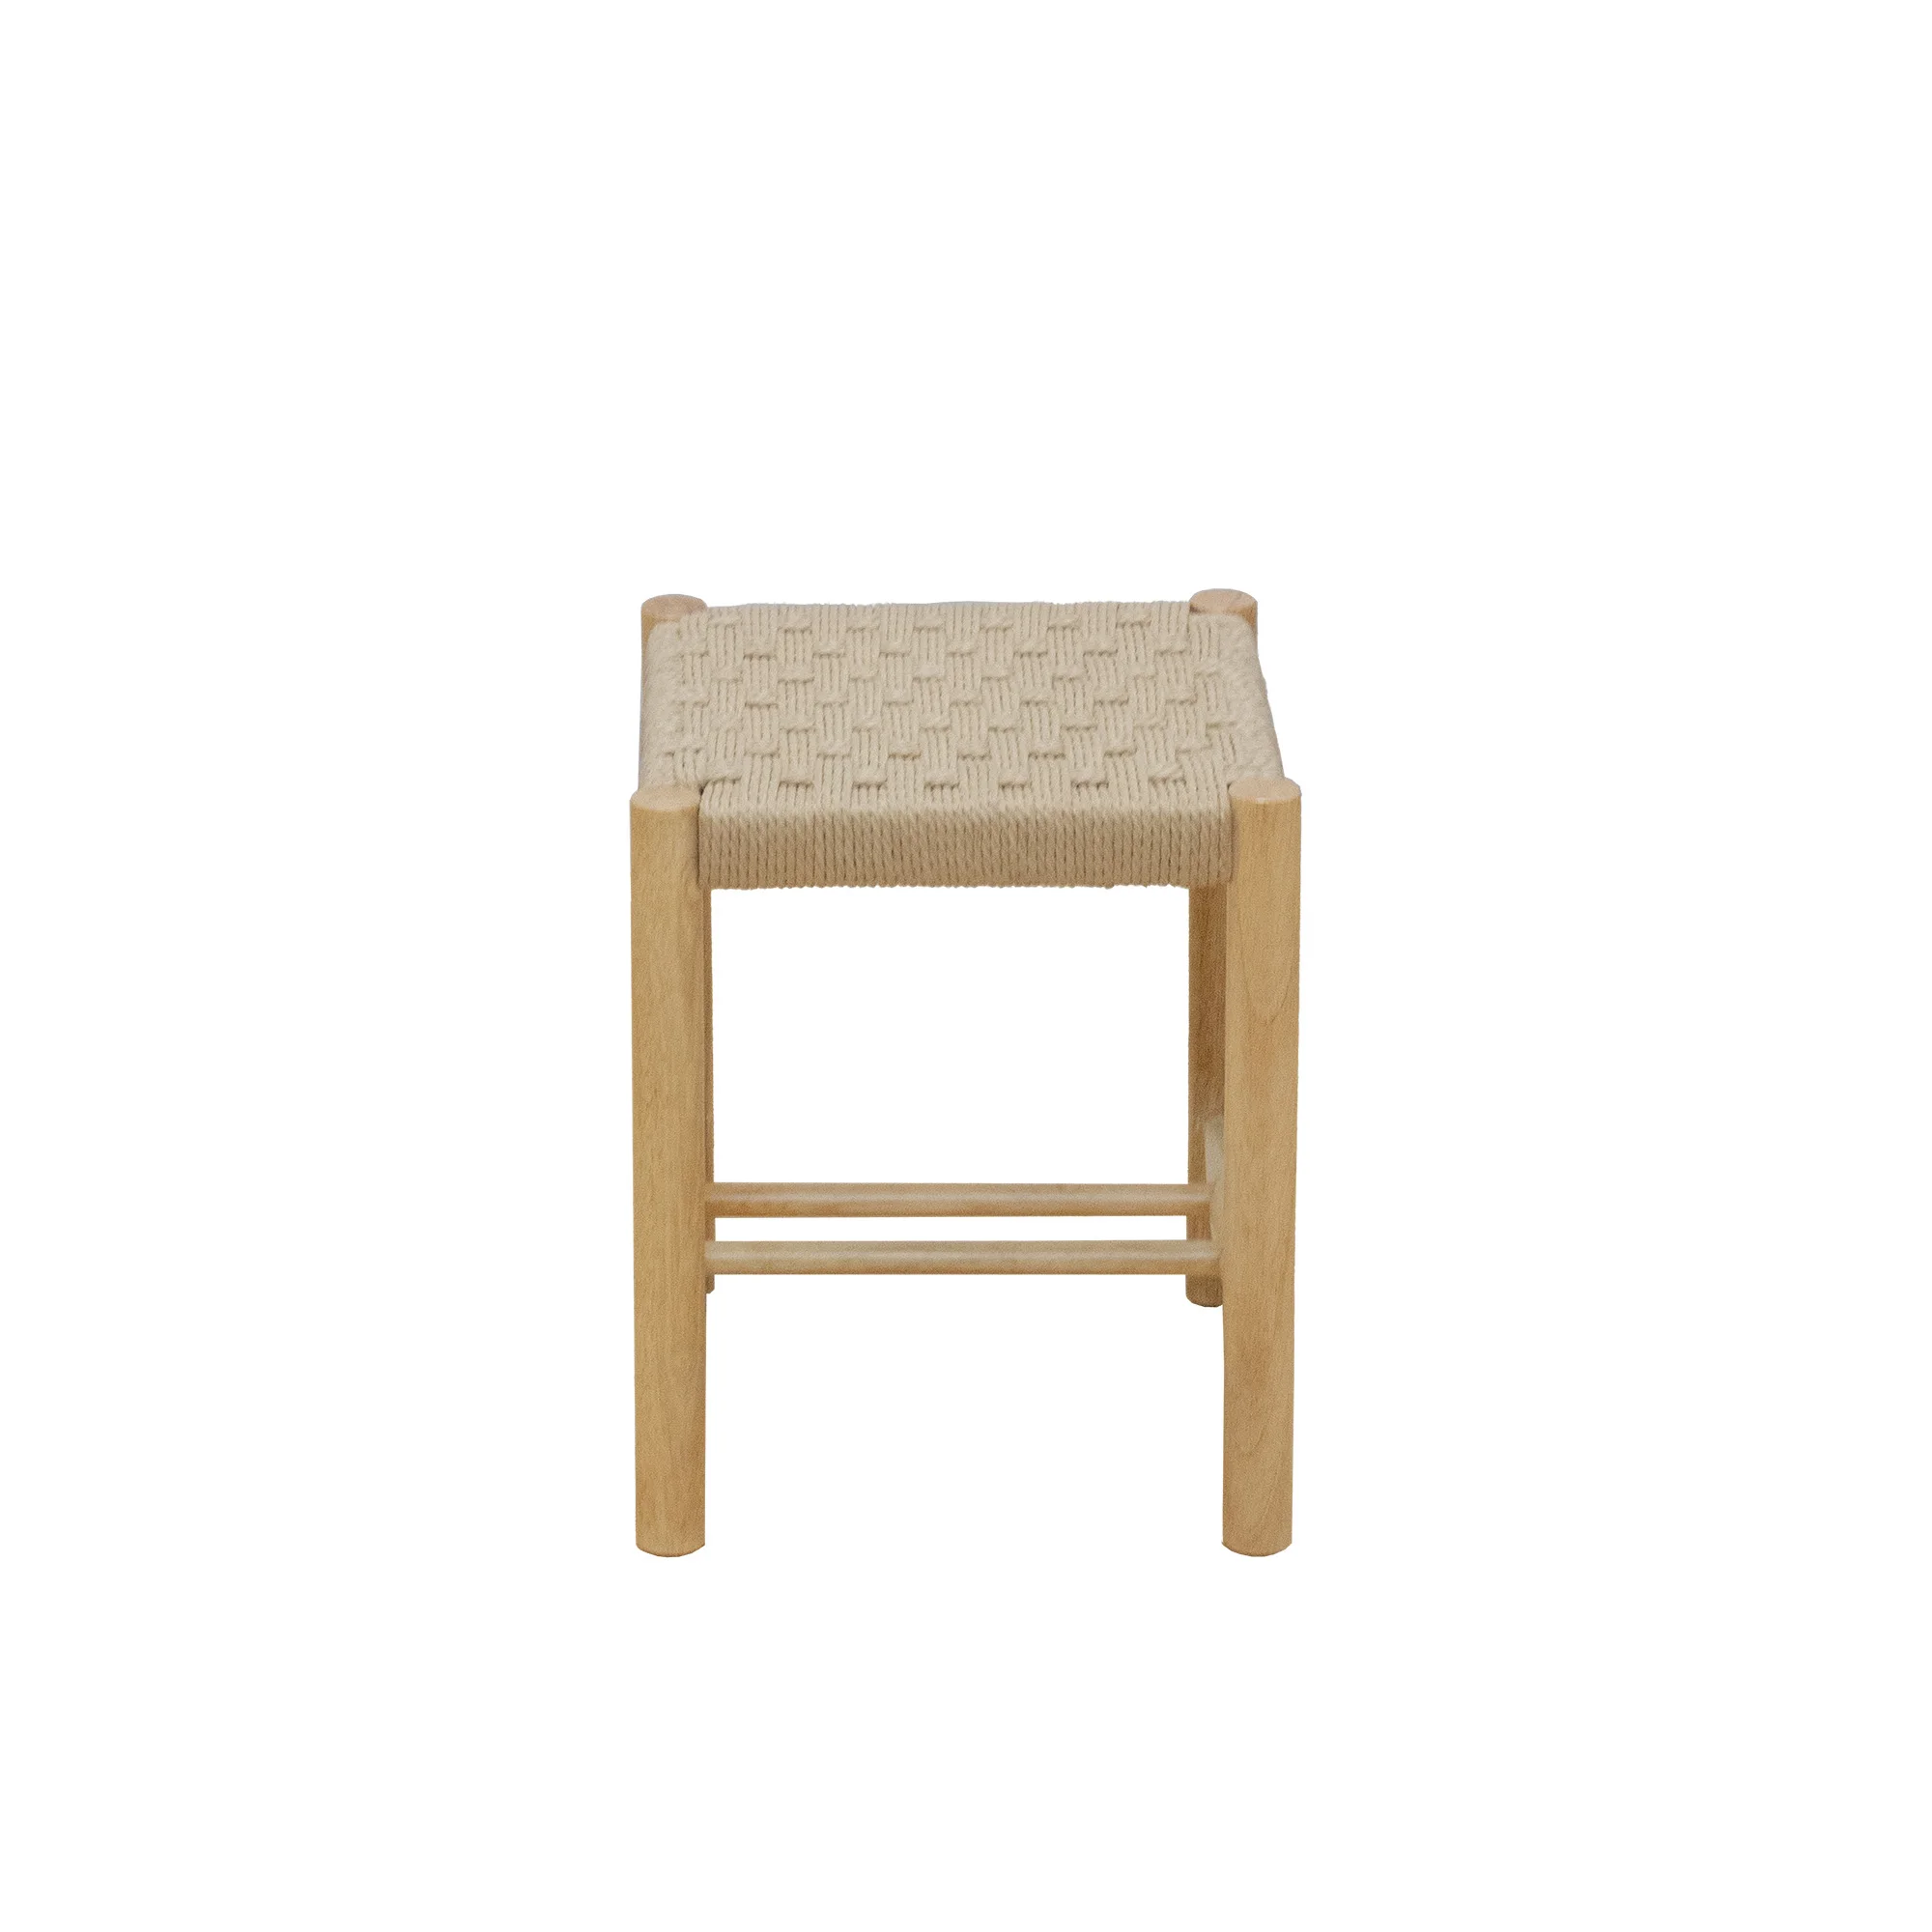 Rope Stool Professional Team Fabric Modern Espresso Color 5-layer ...